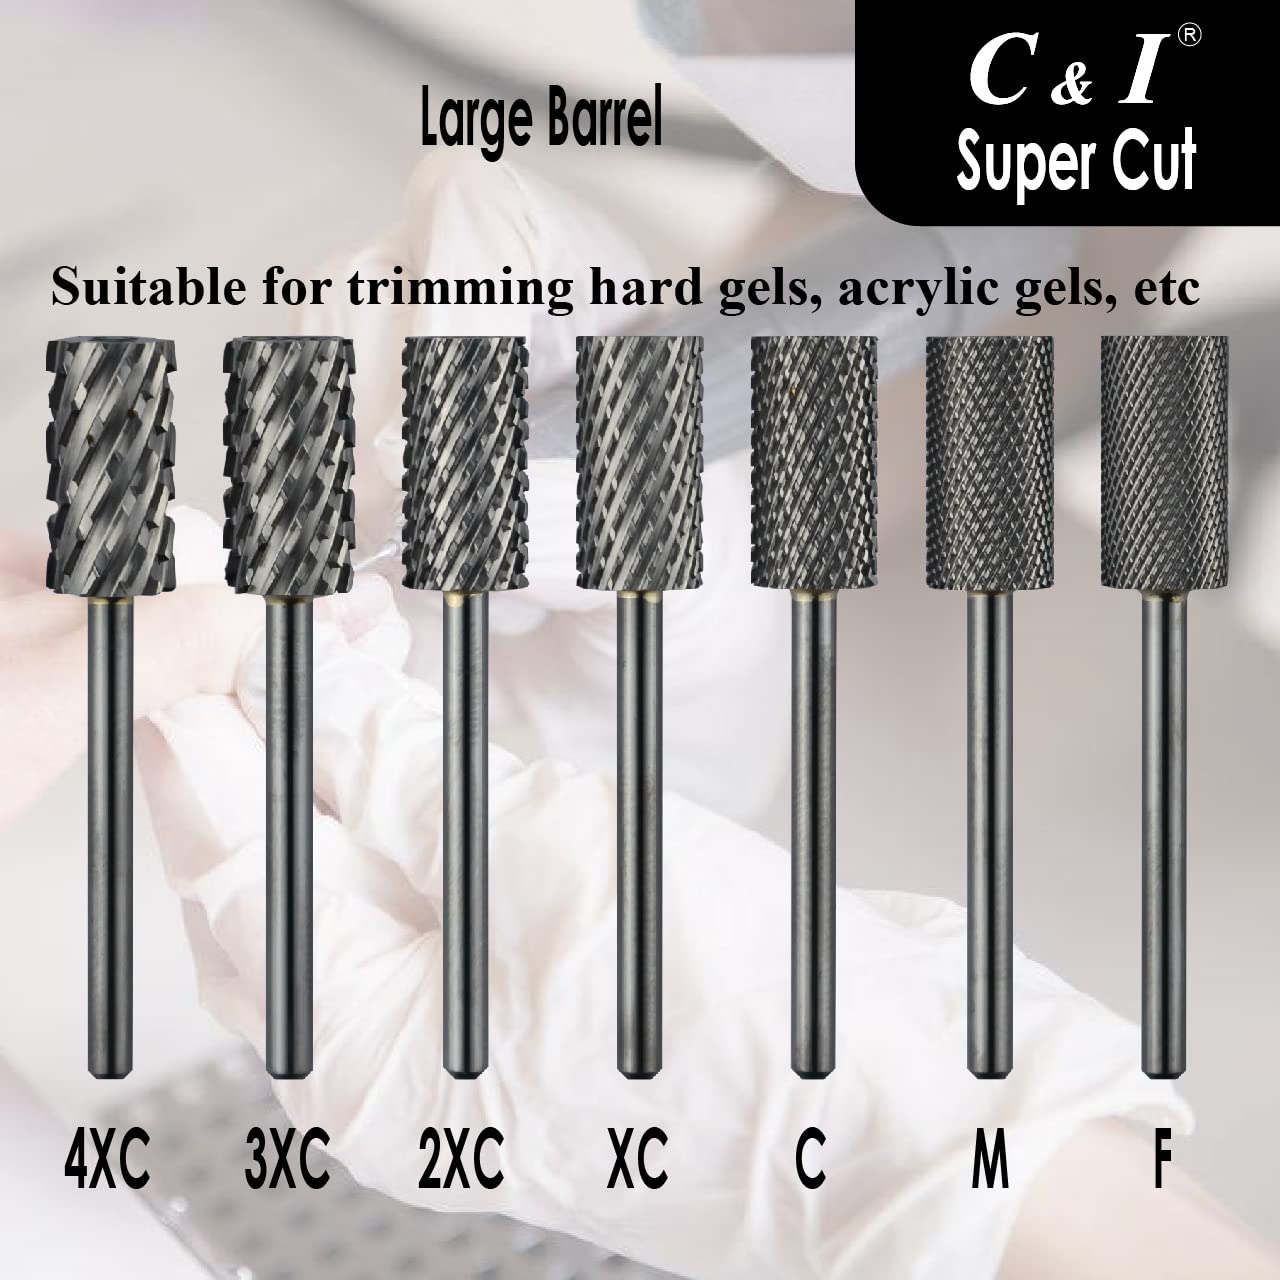 C & I Nail Drill Bit, Super Cut Edition – Upgrade File Teeth, Large Barrel, Professional E File for Electric Nail Drill Machine, Good to Remove Super-Hard Nail Gels (Middle -M)